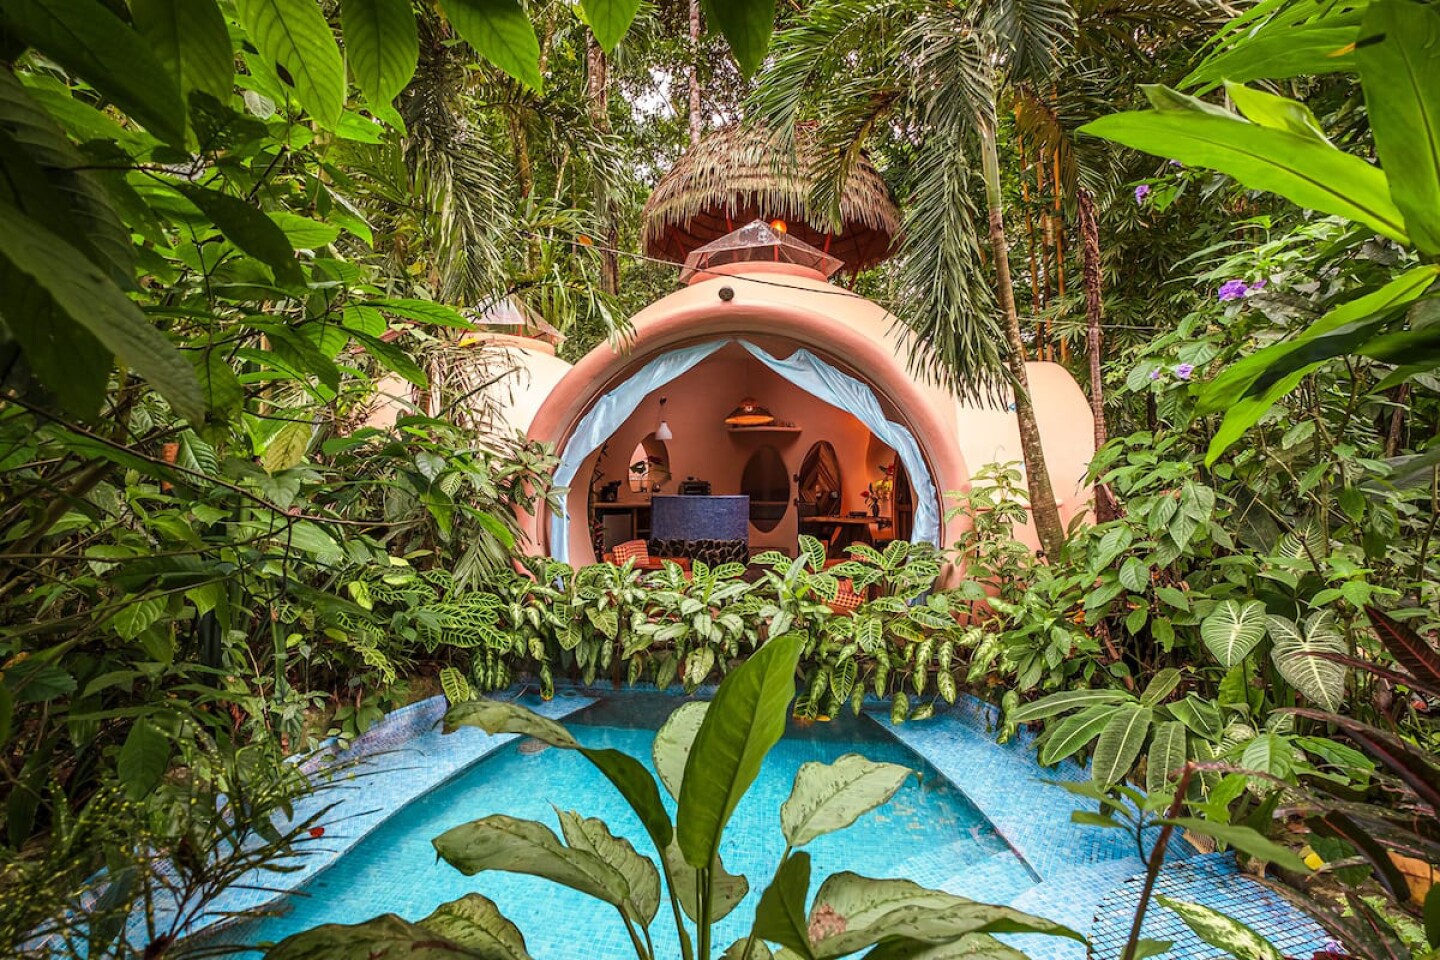 <a>The enormous round window in this whimsical house looks out to the lush, plant-surrounded pool.</a>